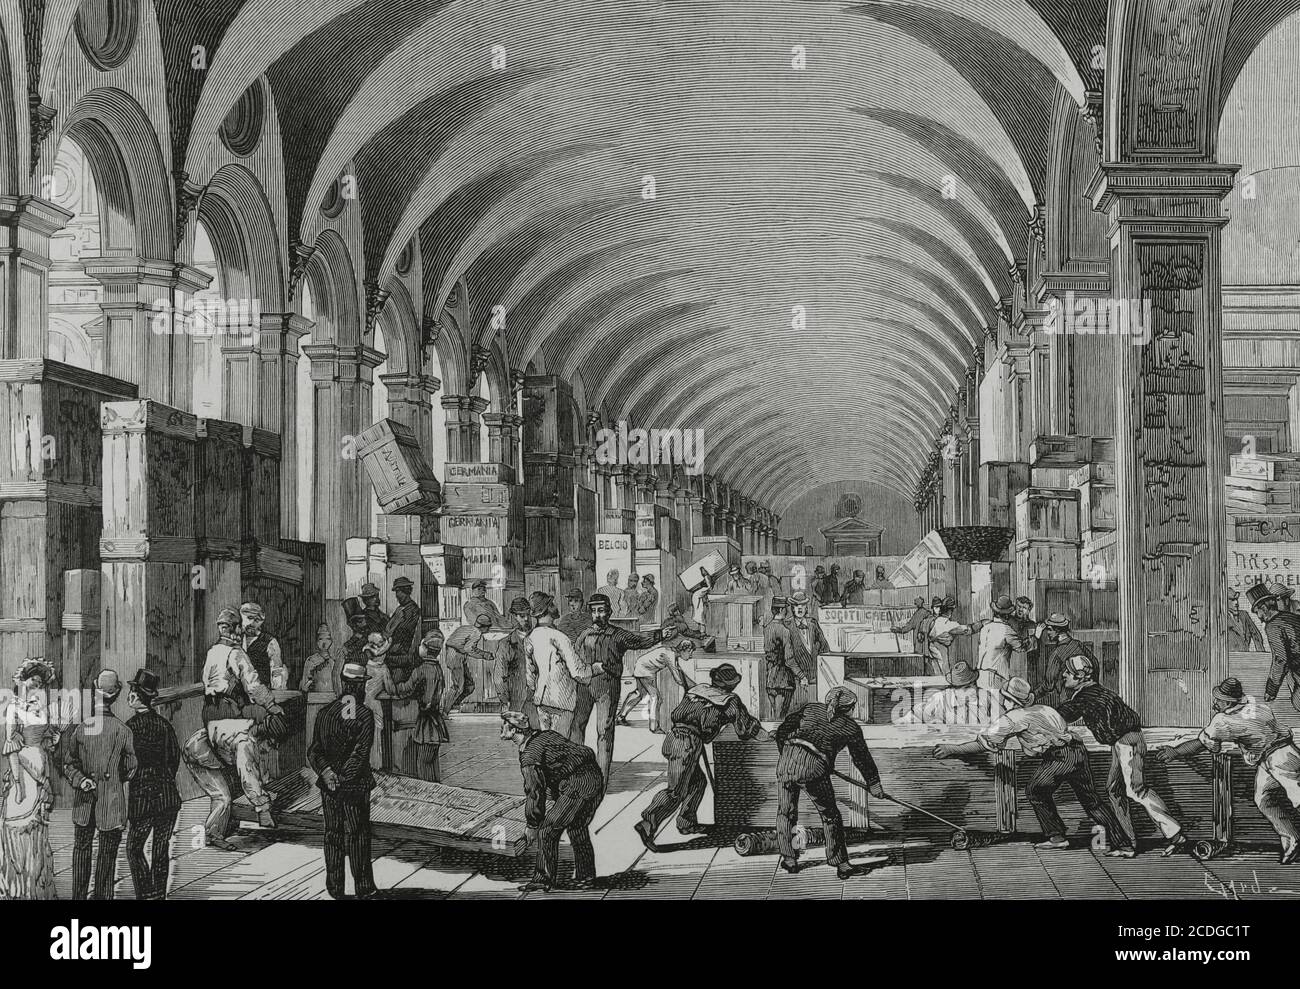 Italy, Venice. Third International Geographical Congress and Exhibition, 1881. The courtyard of the Doge's Palace at the arrival of the first shipments. Engraving by Tomás Carlos Capuz (1834-1899). La Ilustracion Española y Americana, 1881. Stock Photo